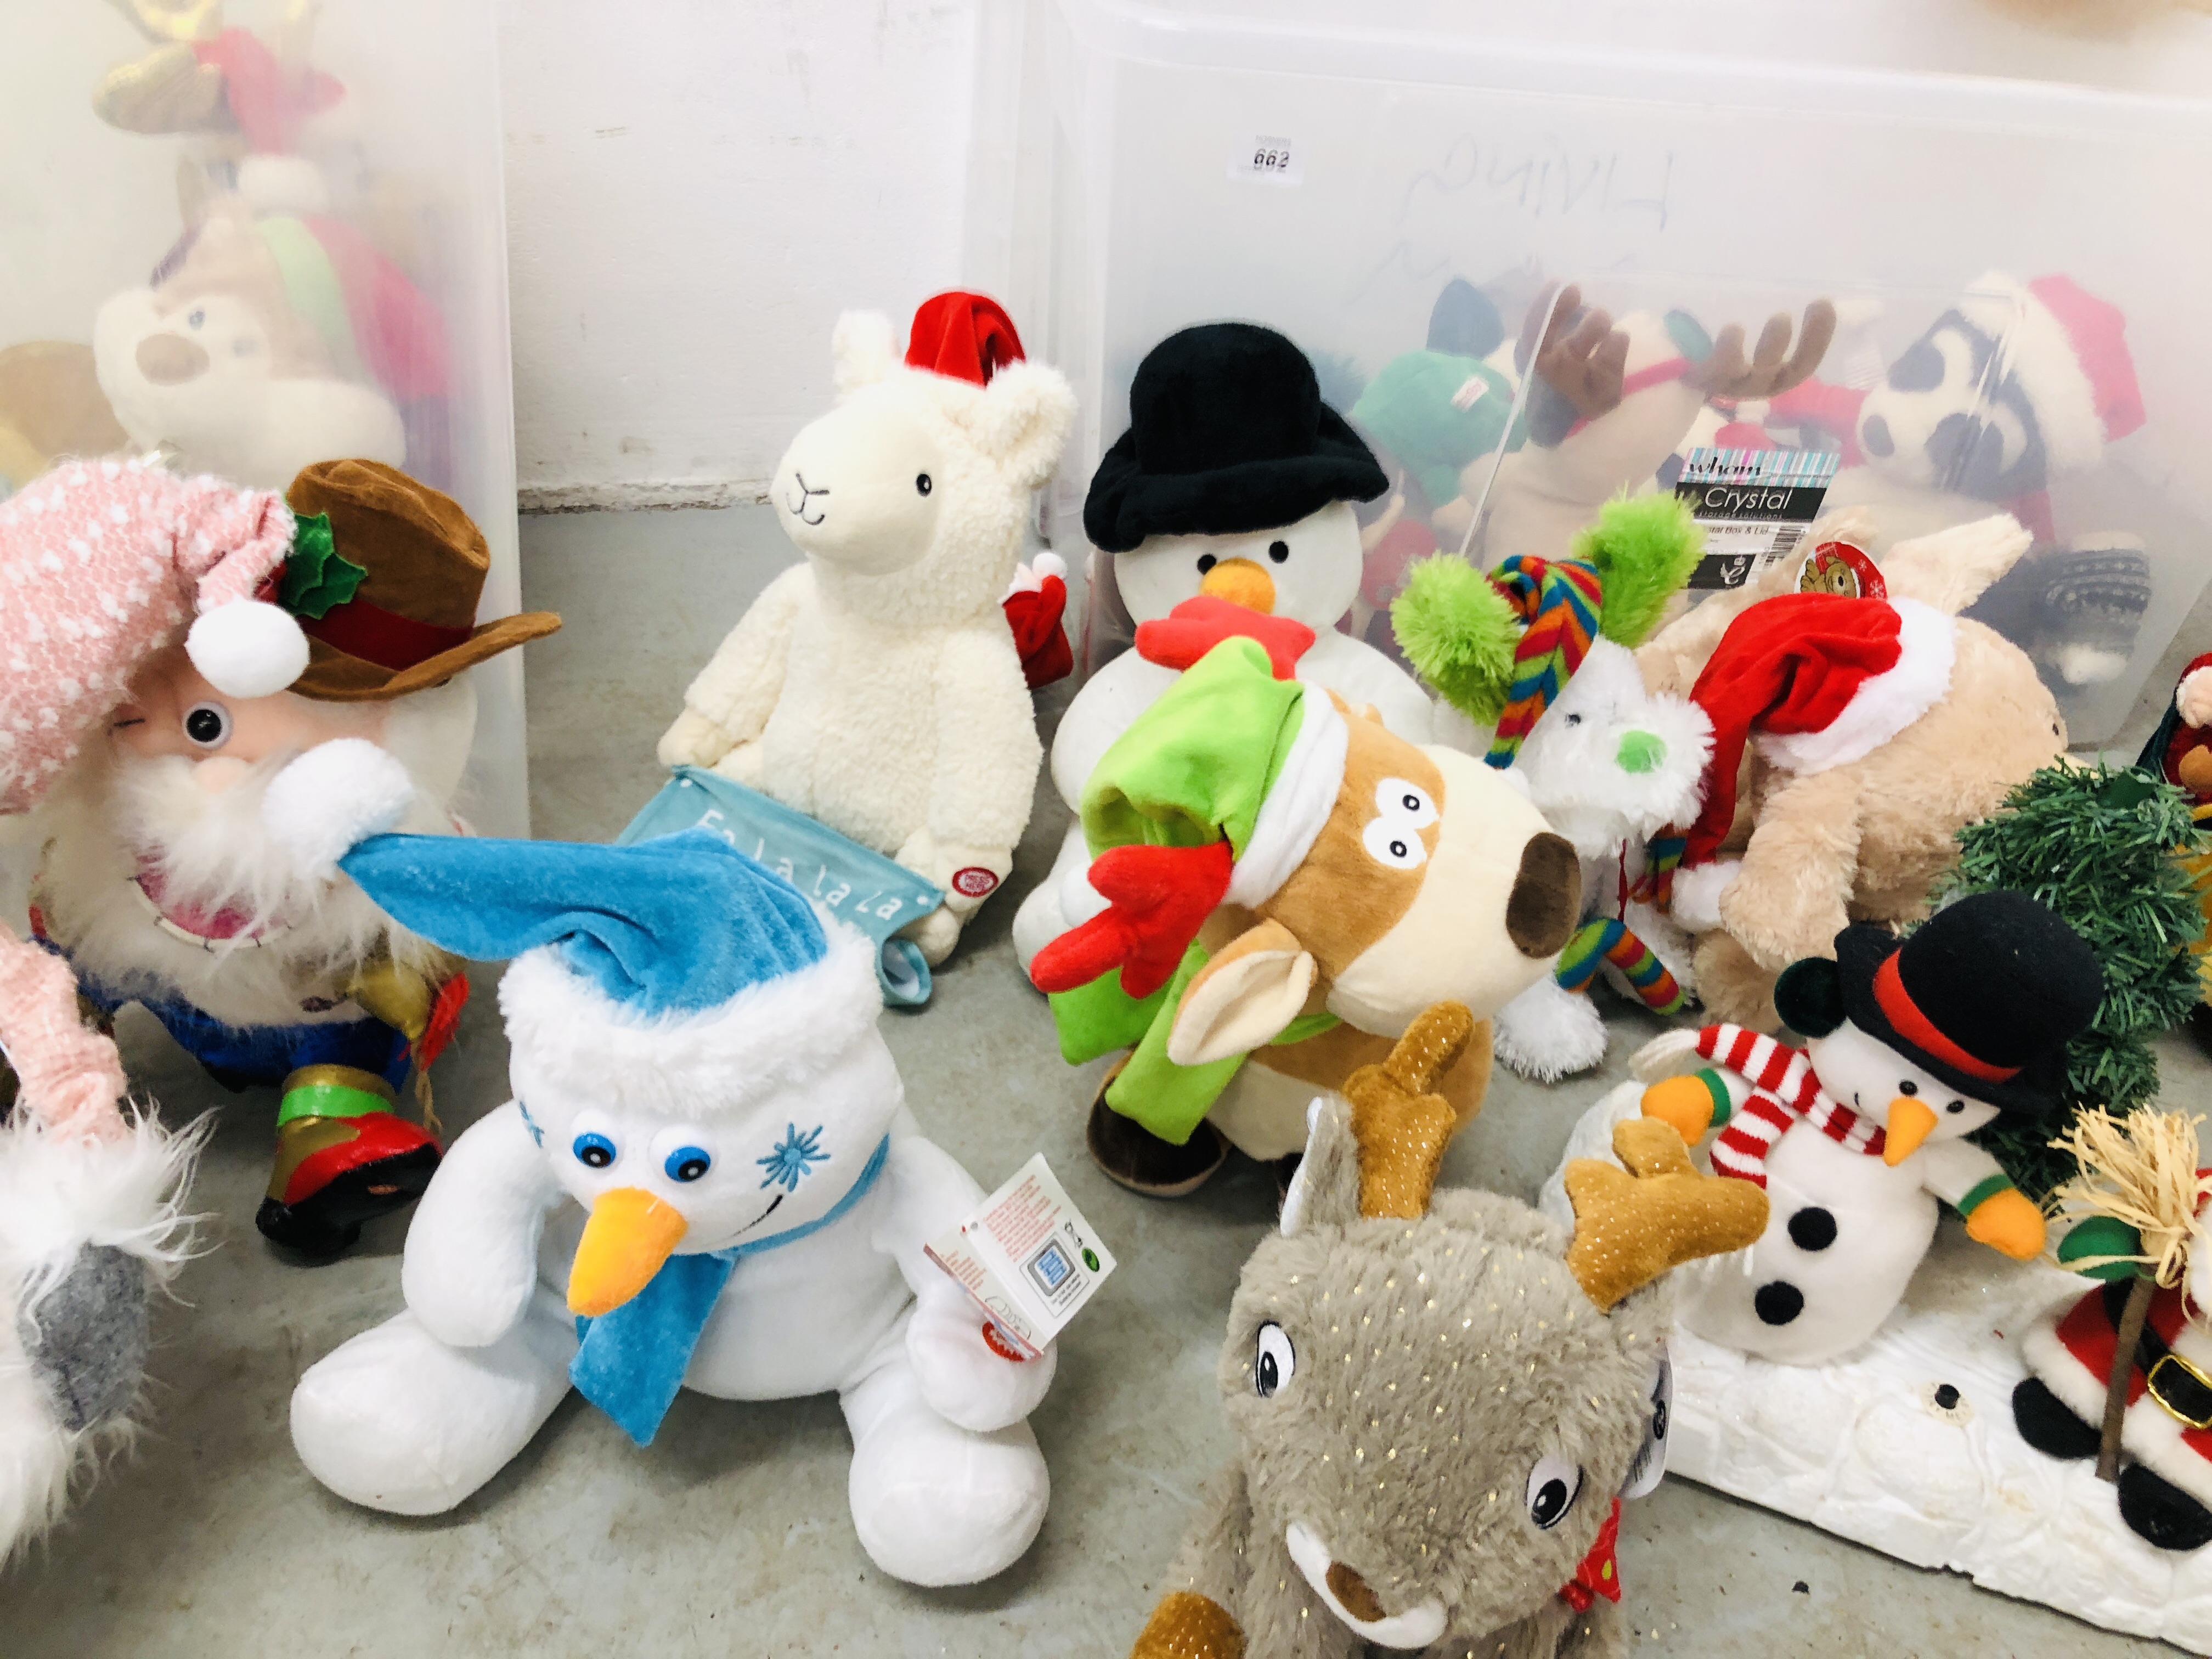 2 LARGE BOXES CONTAINING APPROXIMATELY 30 SOFT CHRISTMAS CHARACTERS, - Image 3 of 8